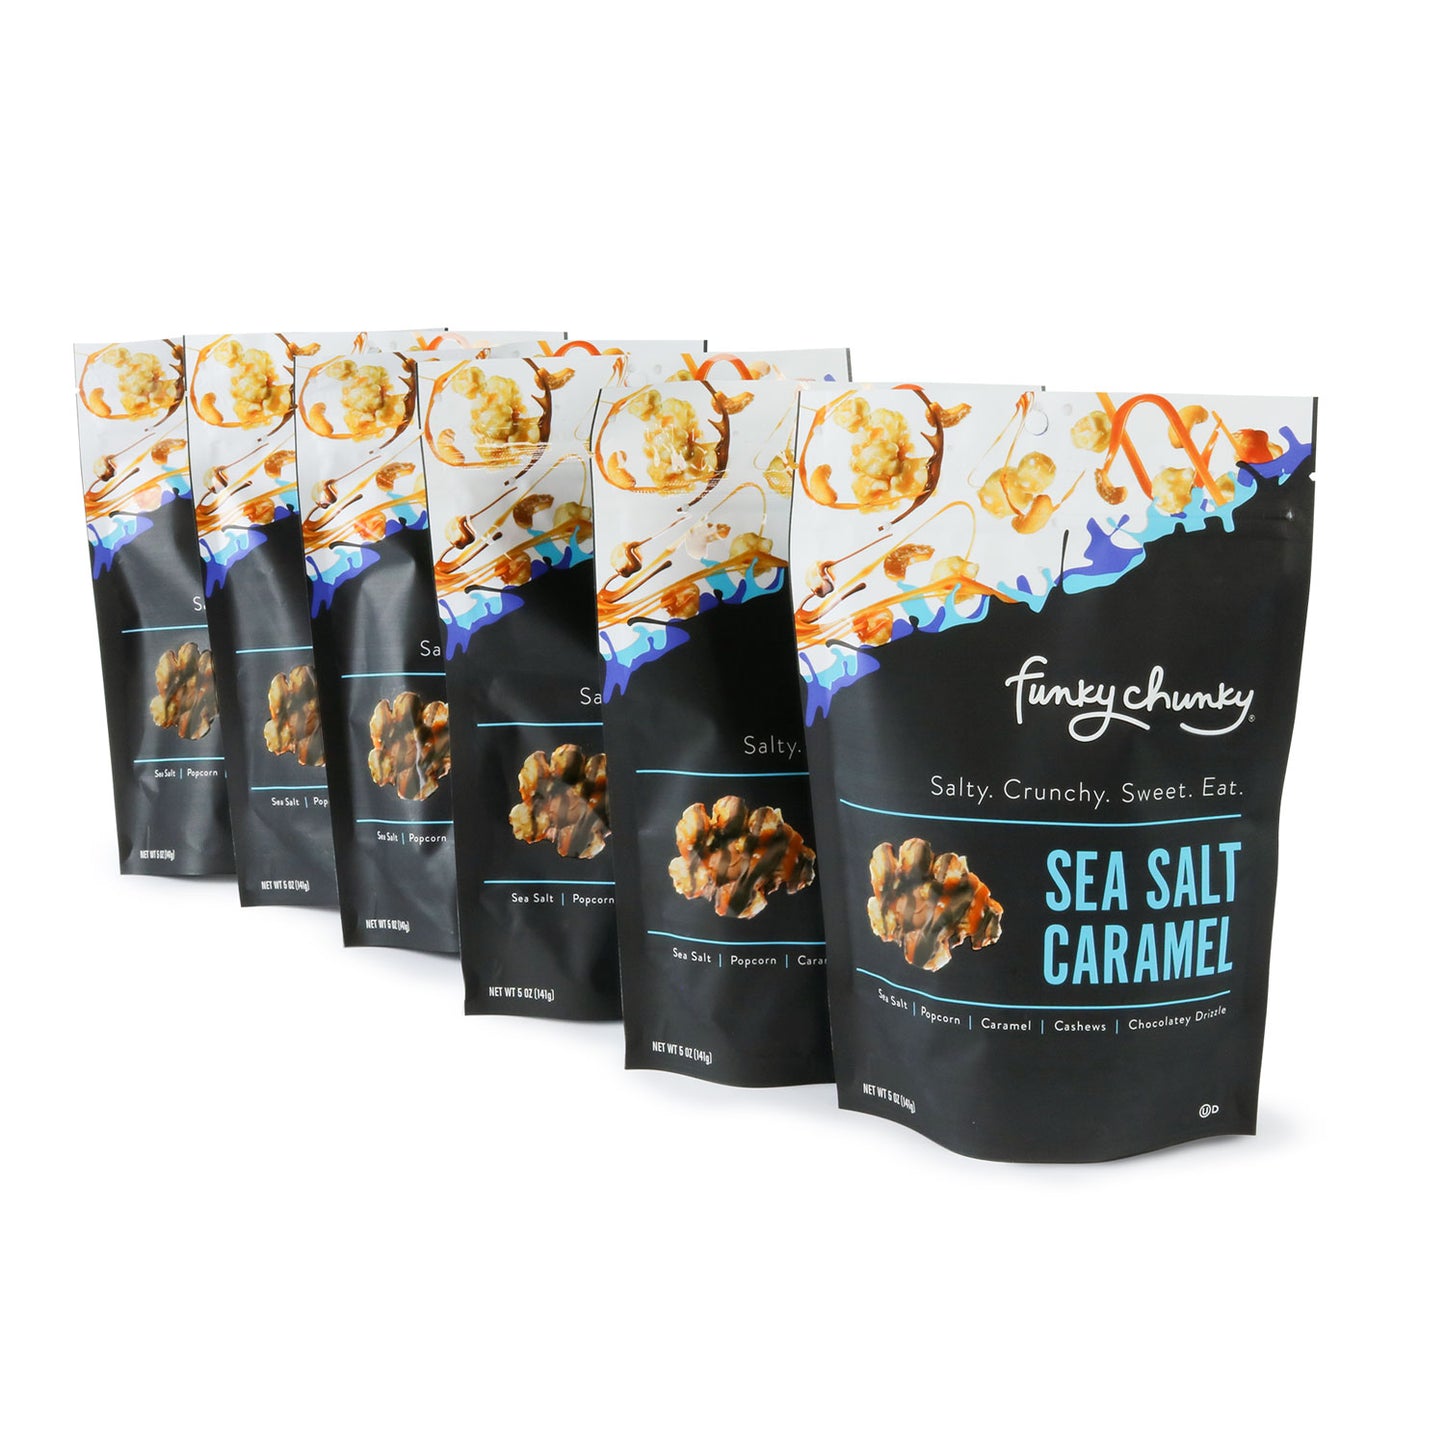 Sea Salt Caramel-td {border: 1px solid #ccc;}br {mso-data-placement:same-cell;} The salty-sweet popcorn treat you’ll crave. We start with delicious caramel popcorn made with real butter and brown sugar. It’s covered in gooey caramel, the perfect amount of sea salt, a sprinkling of roasted cashews and a final drizzle of milk and dark chocolatey goodness.-Funky Chunky